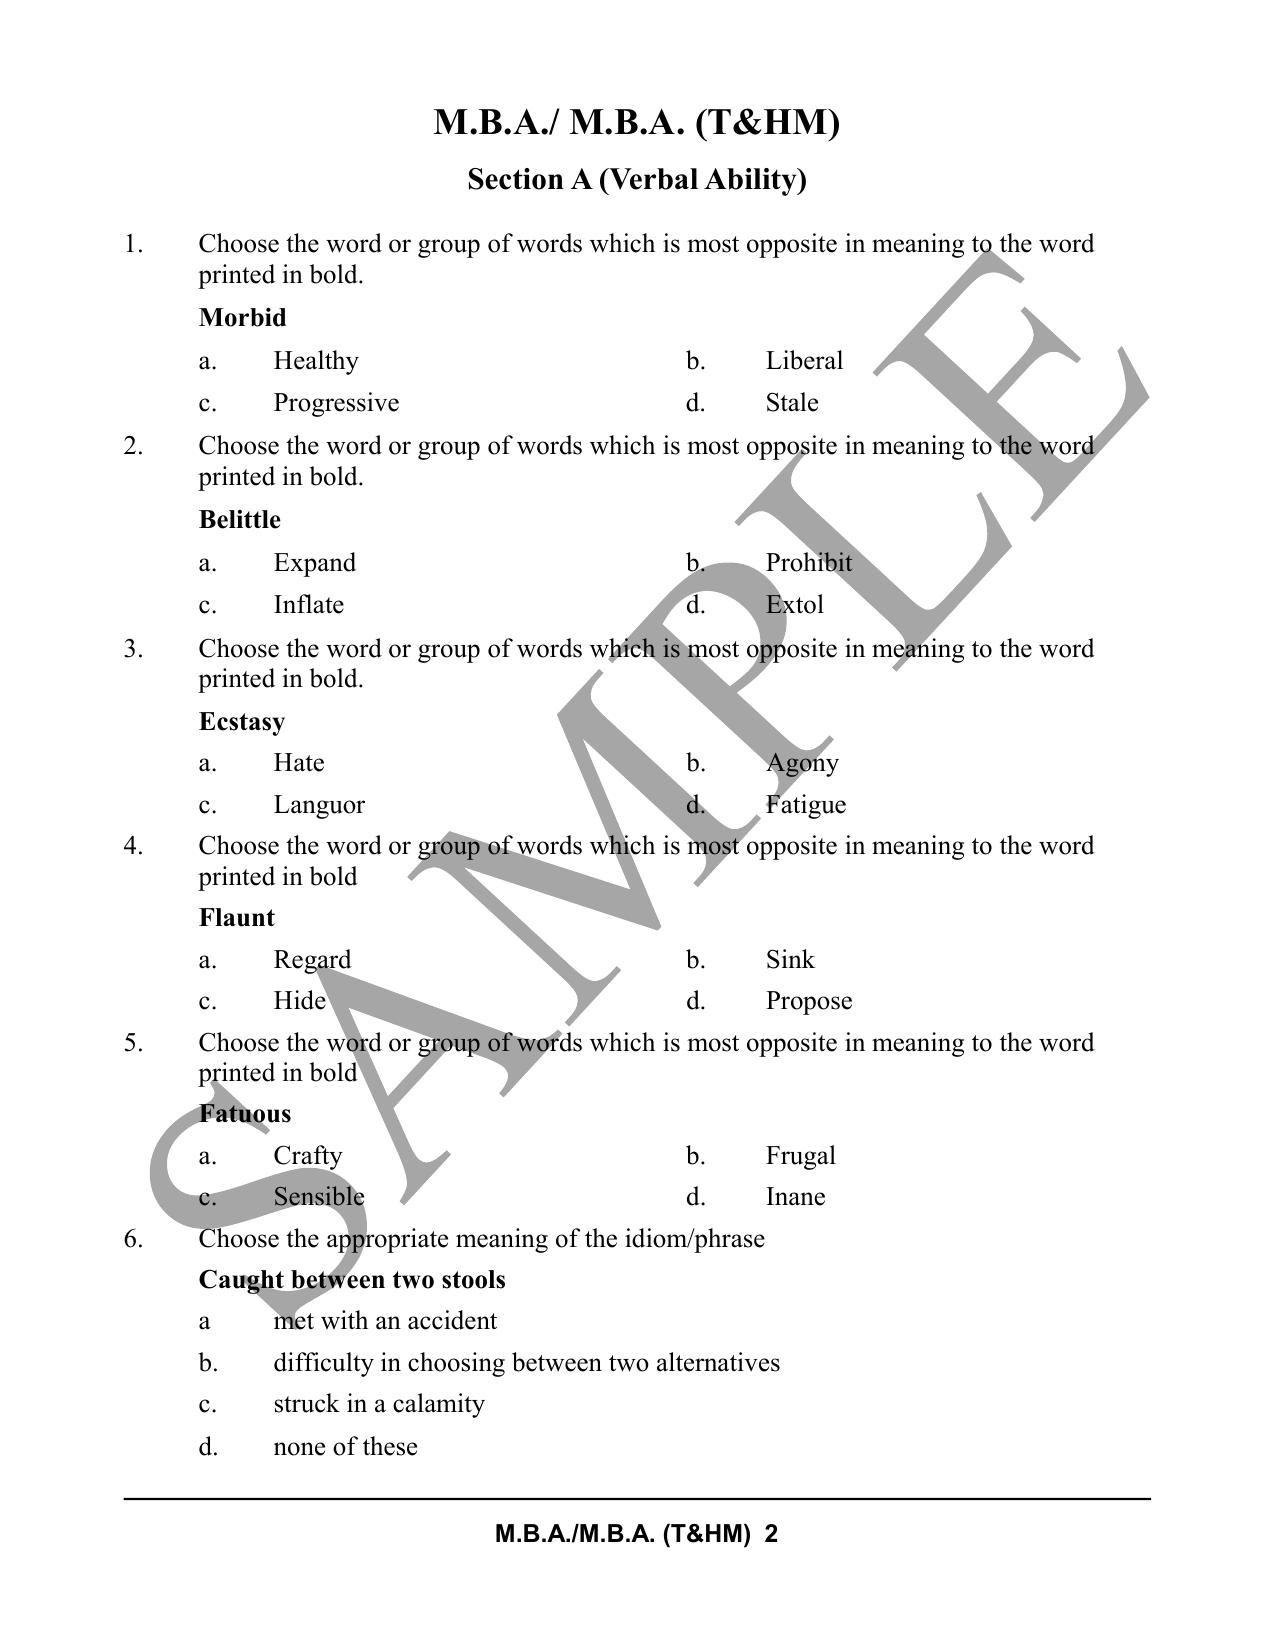 HPCET MBA and MBA (T&HM) Sample Paper 2023 Sample Paper - Page 2